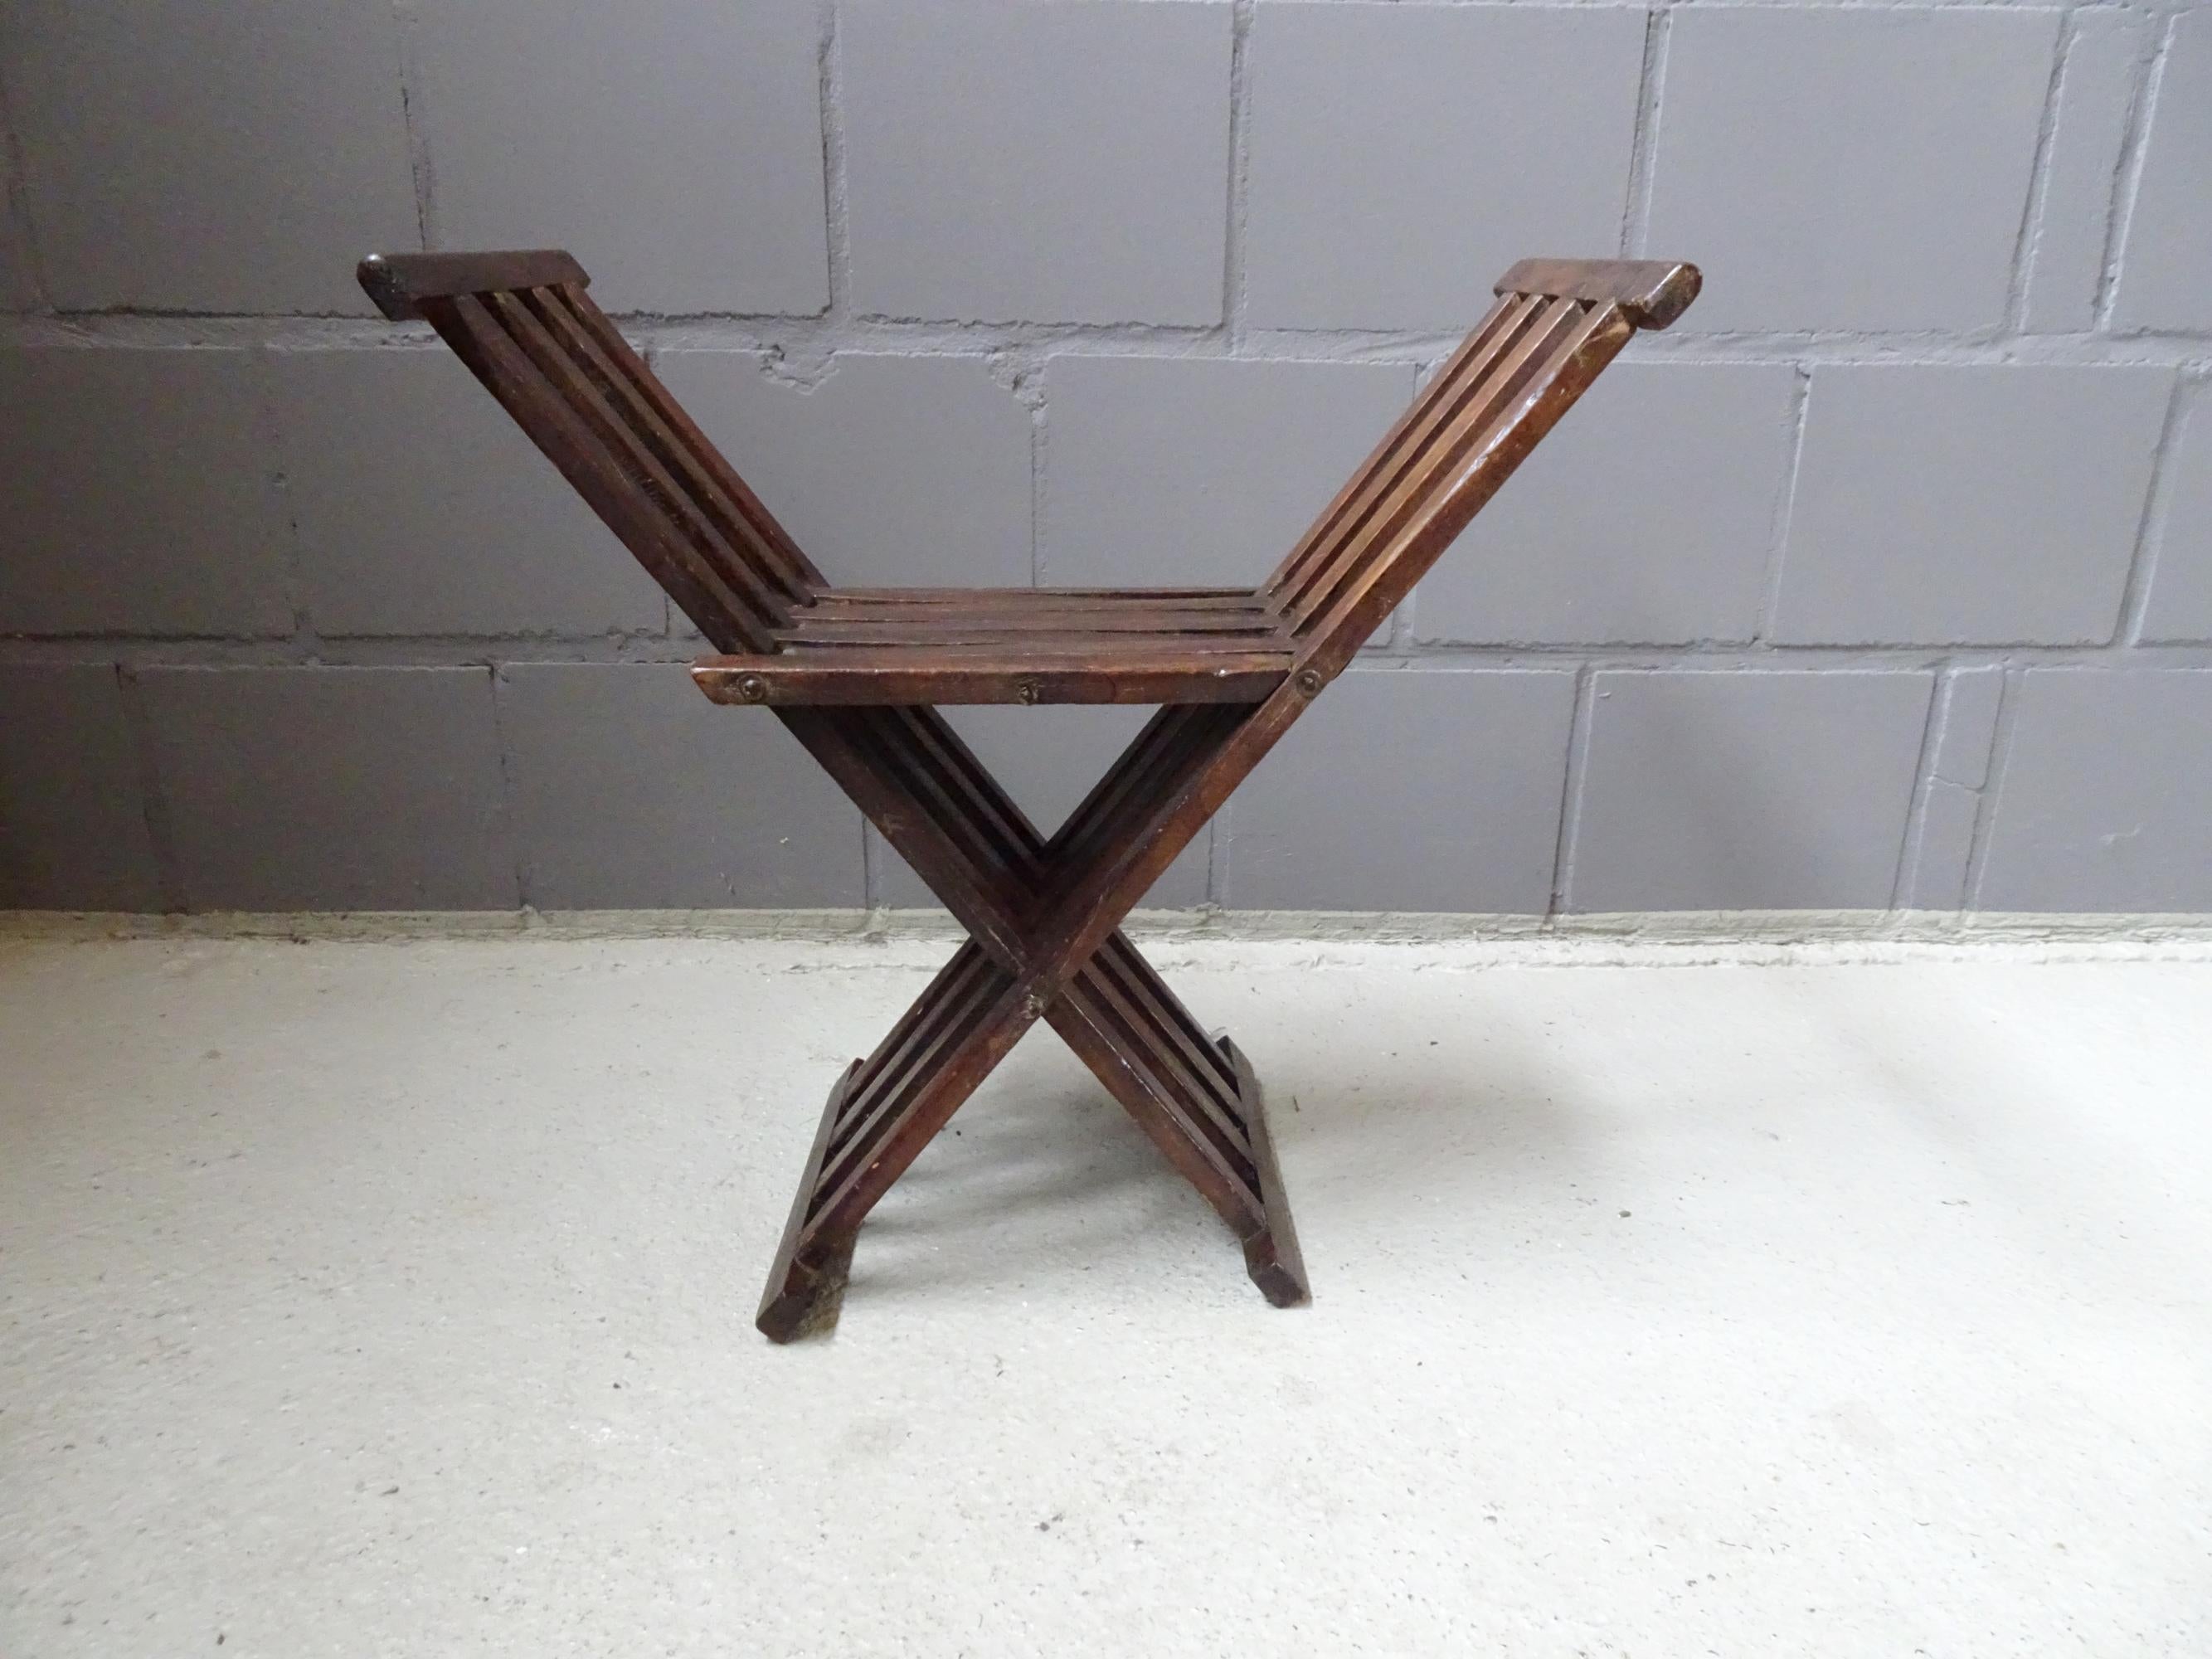 Antique wooden stool with folding function made of beechwood. A rare piece that immediately impresses with its function and appearance. The scissor chair can serve as a stool, but also very well as a side table or console.

It is folded in just a